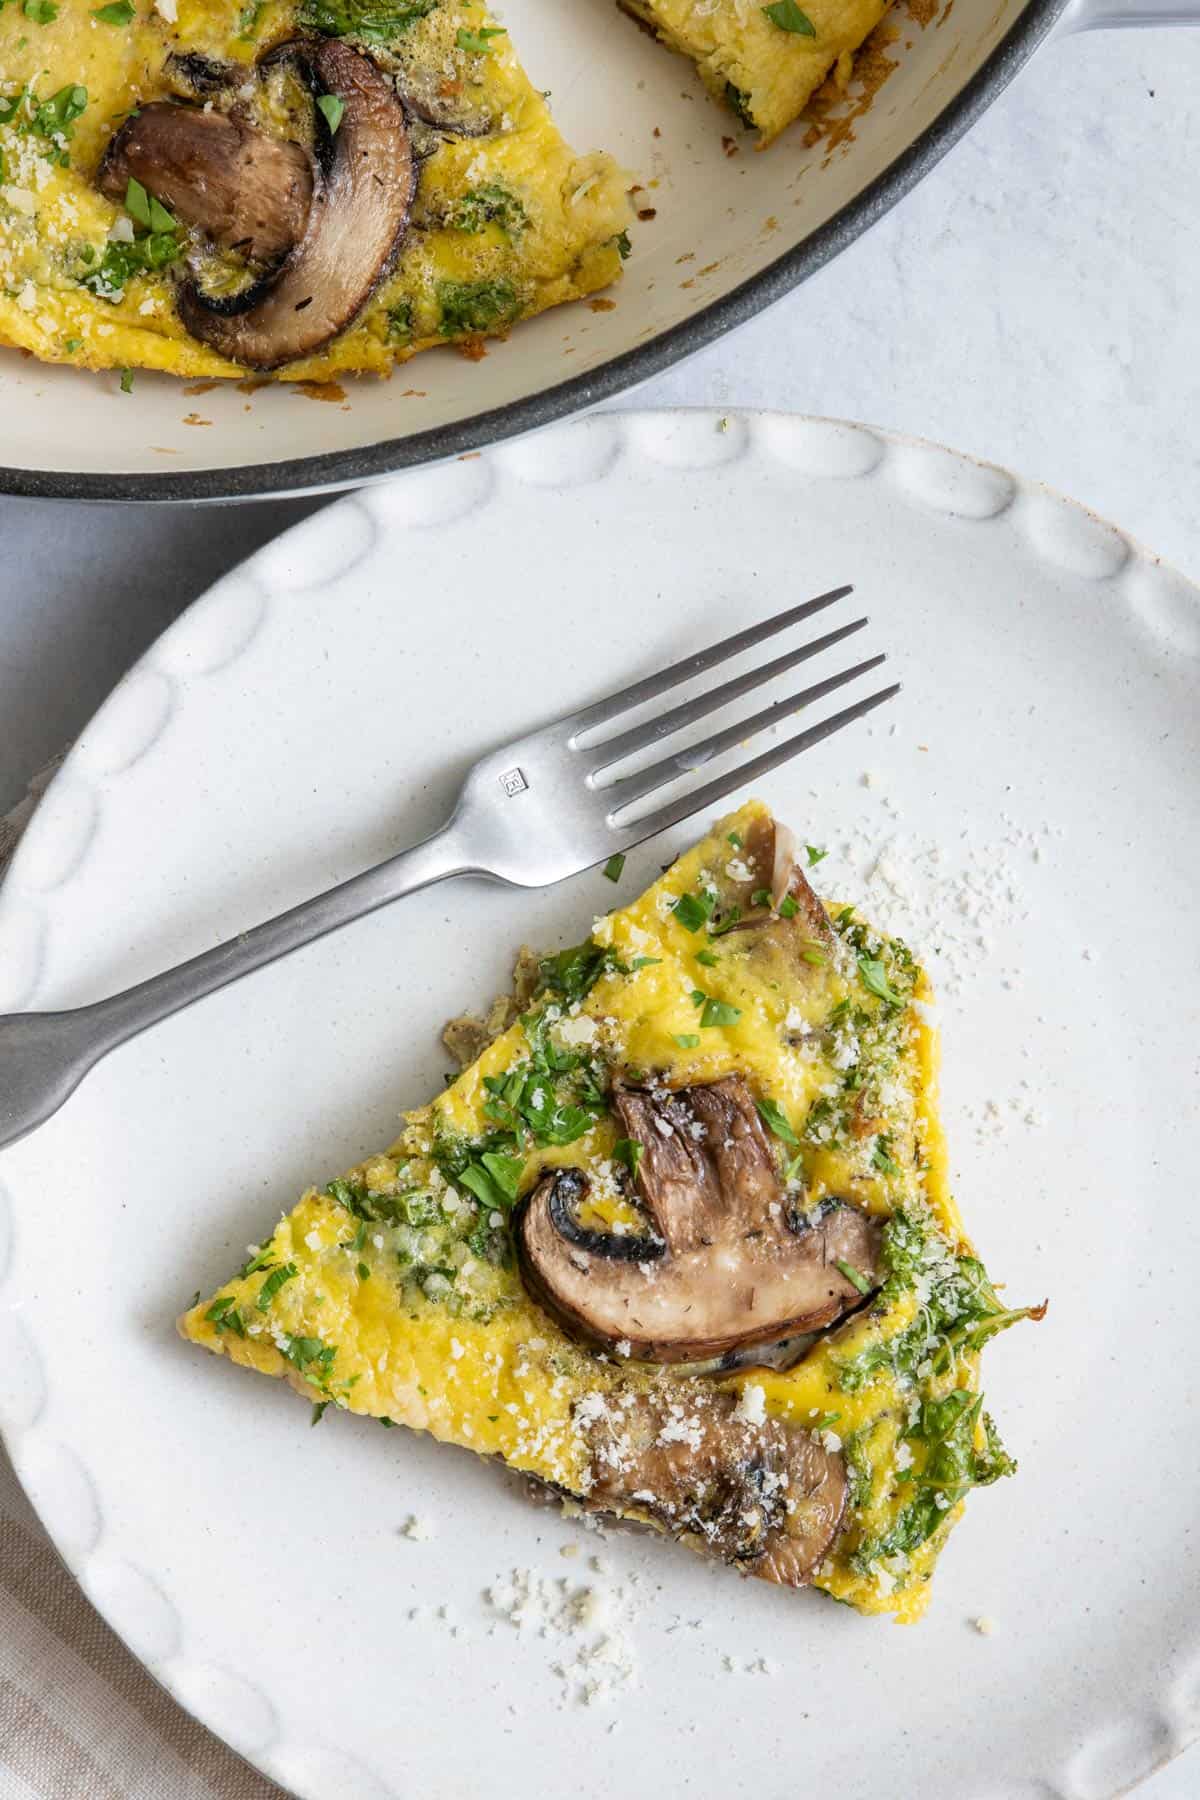 Slice of mushroom frittata served on a plate with fork and baking dish off to side.